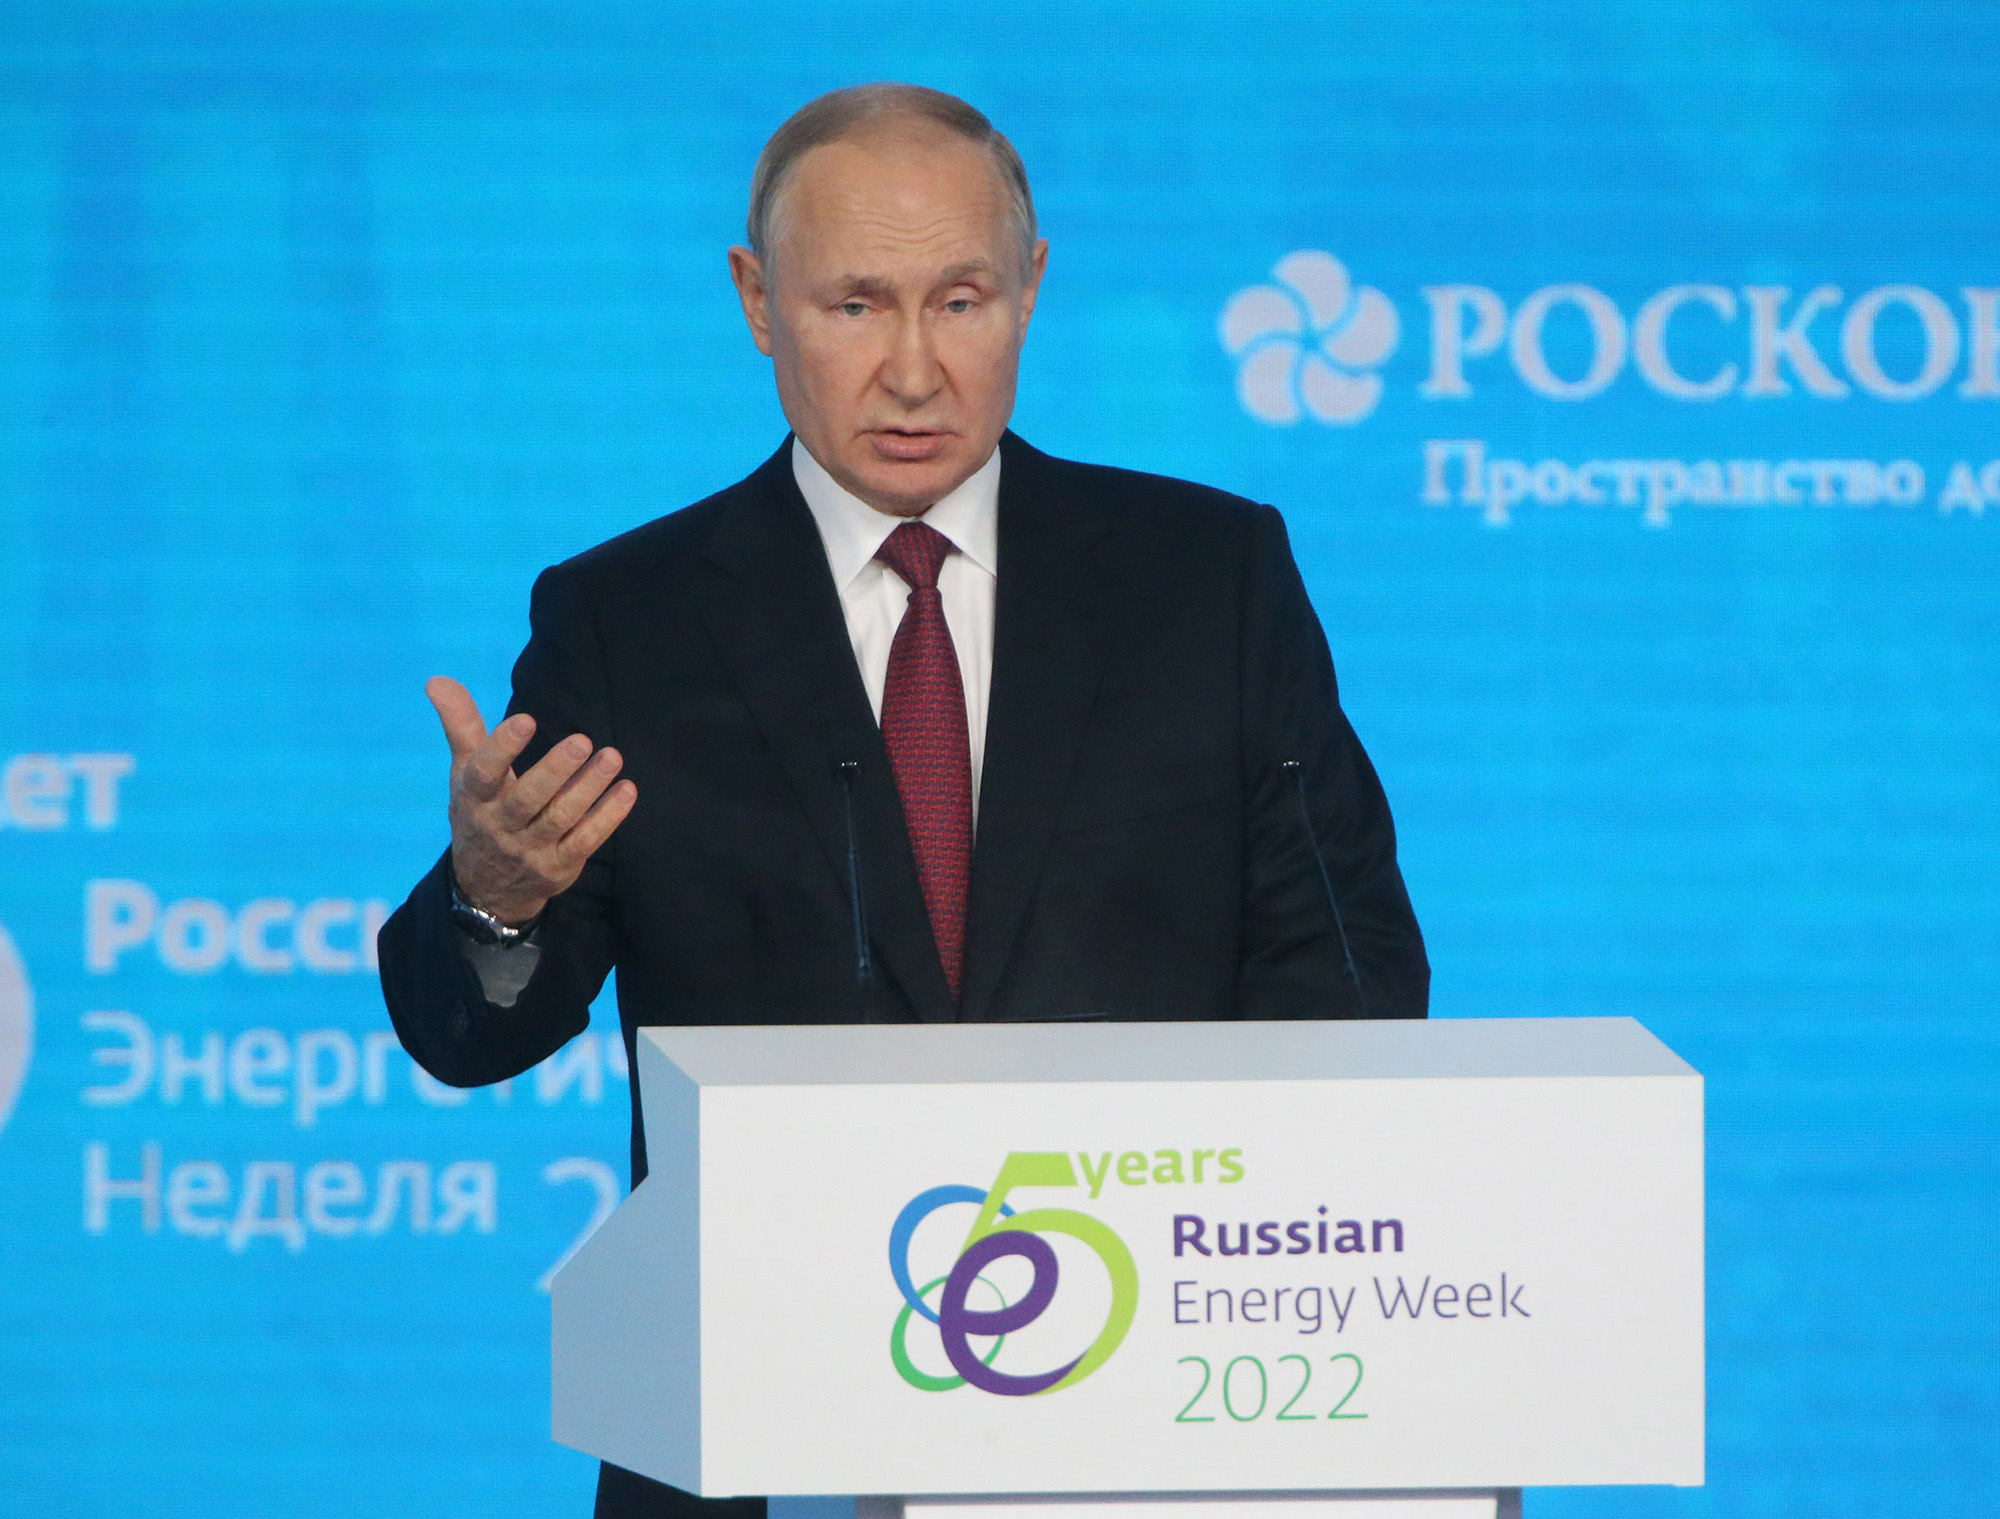 Russian President Vladimir Putin delivers a key speech during the plenary session of Russian Energy Week 2022 on October 12, in Moscow, Russia.